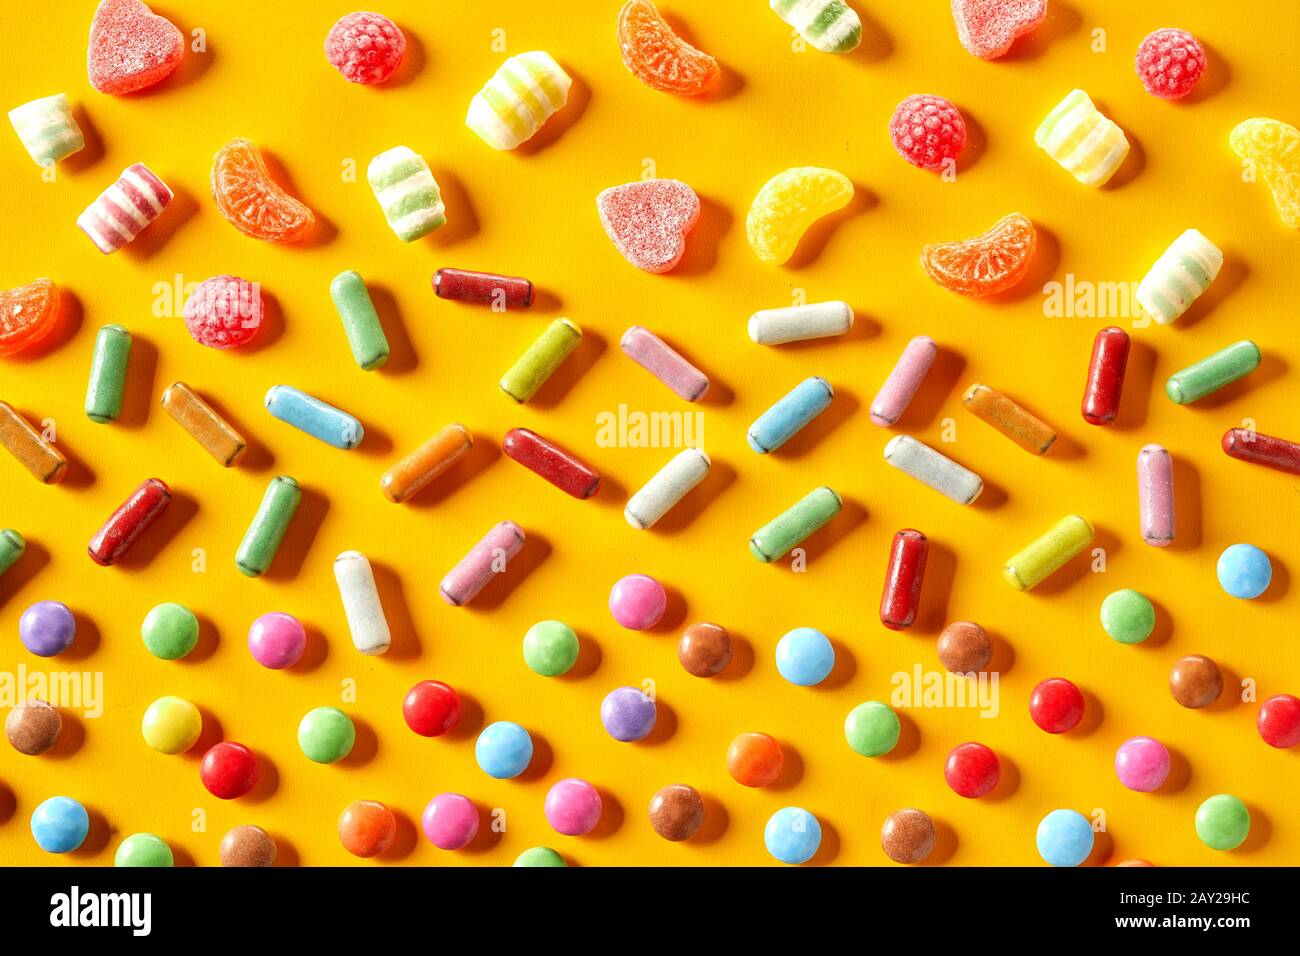 Colourful party background of rainbow candy with fruity jelly jub jubs, sugar-coated liquorice and chocolate over a vibrant yellow in a full frame vie Stock Photo